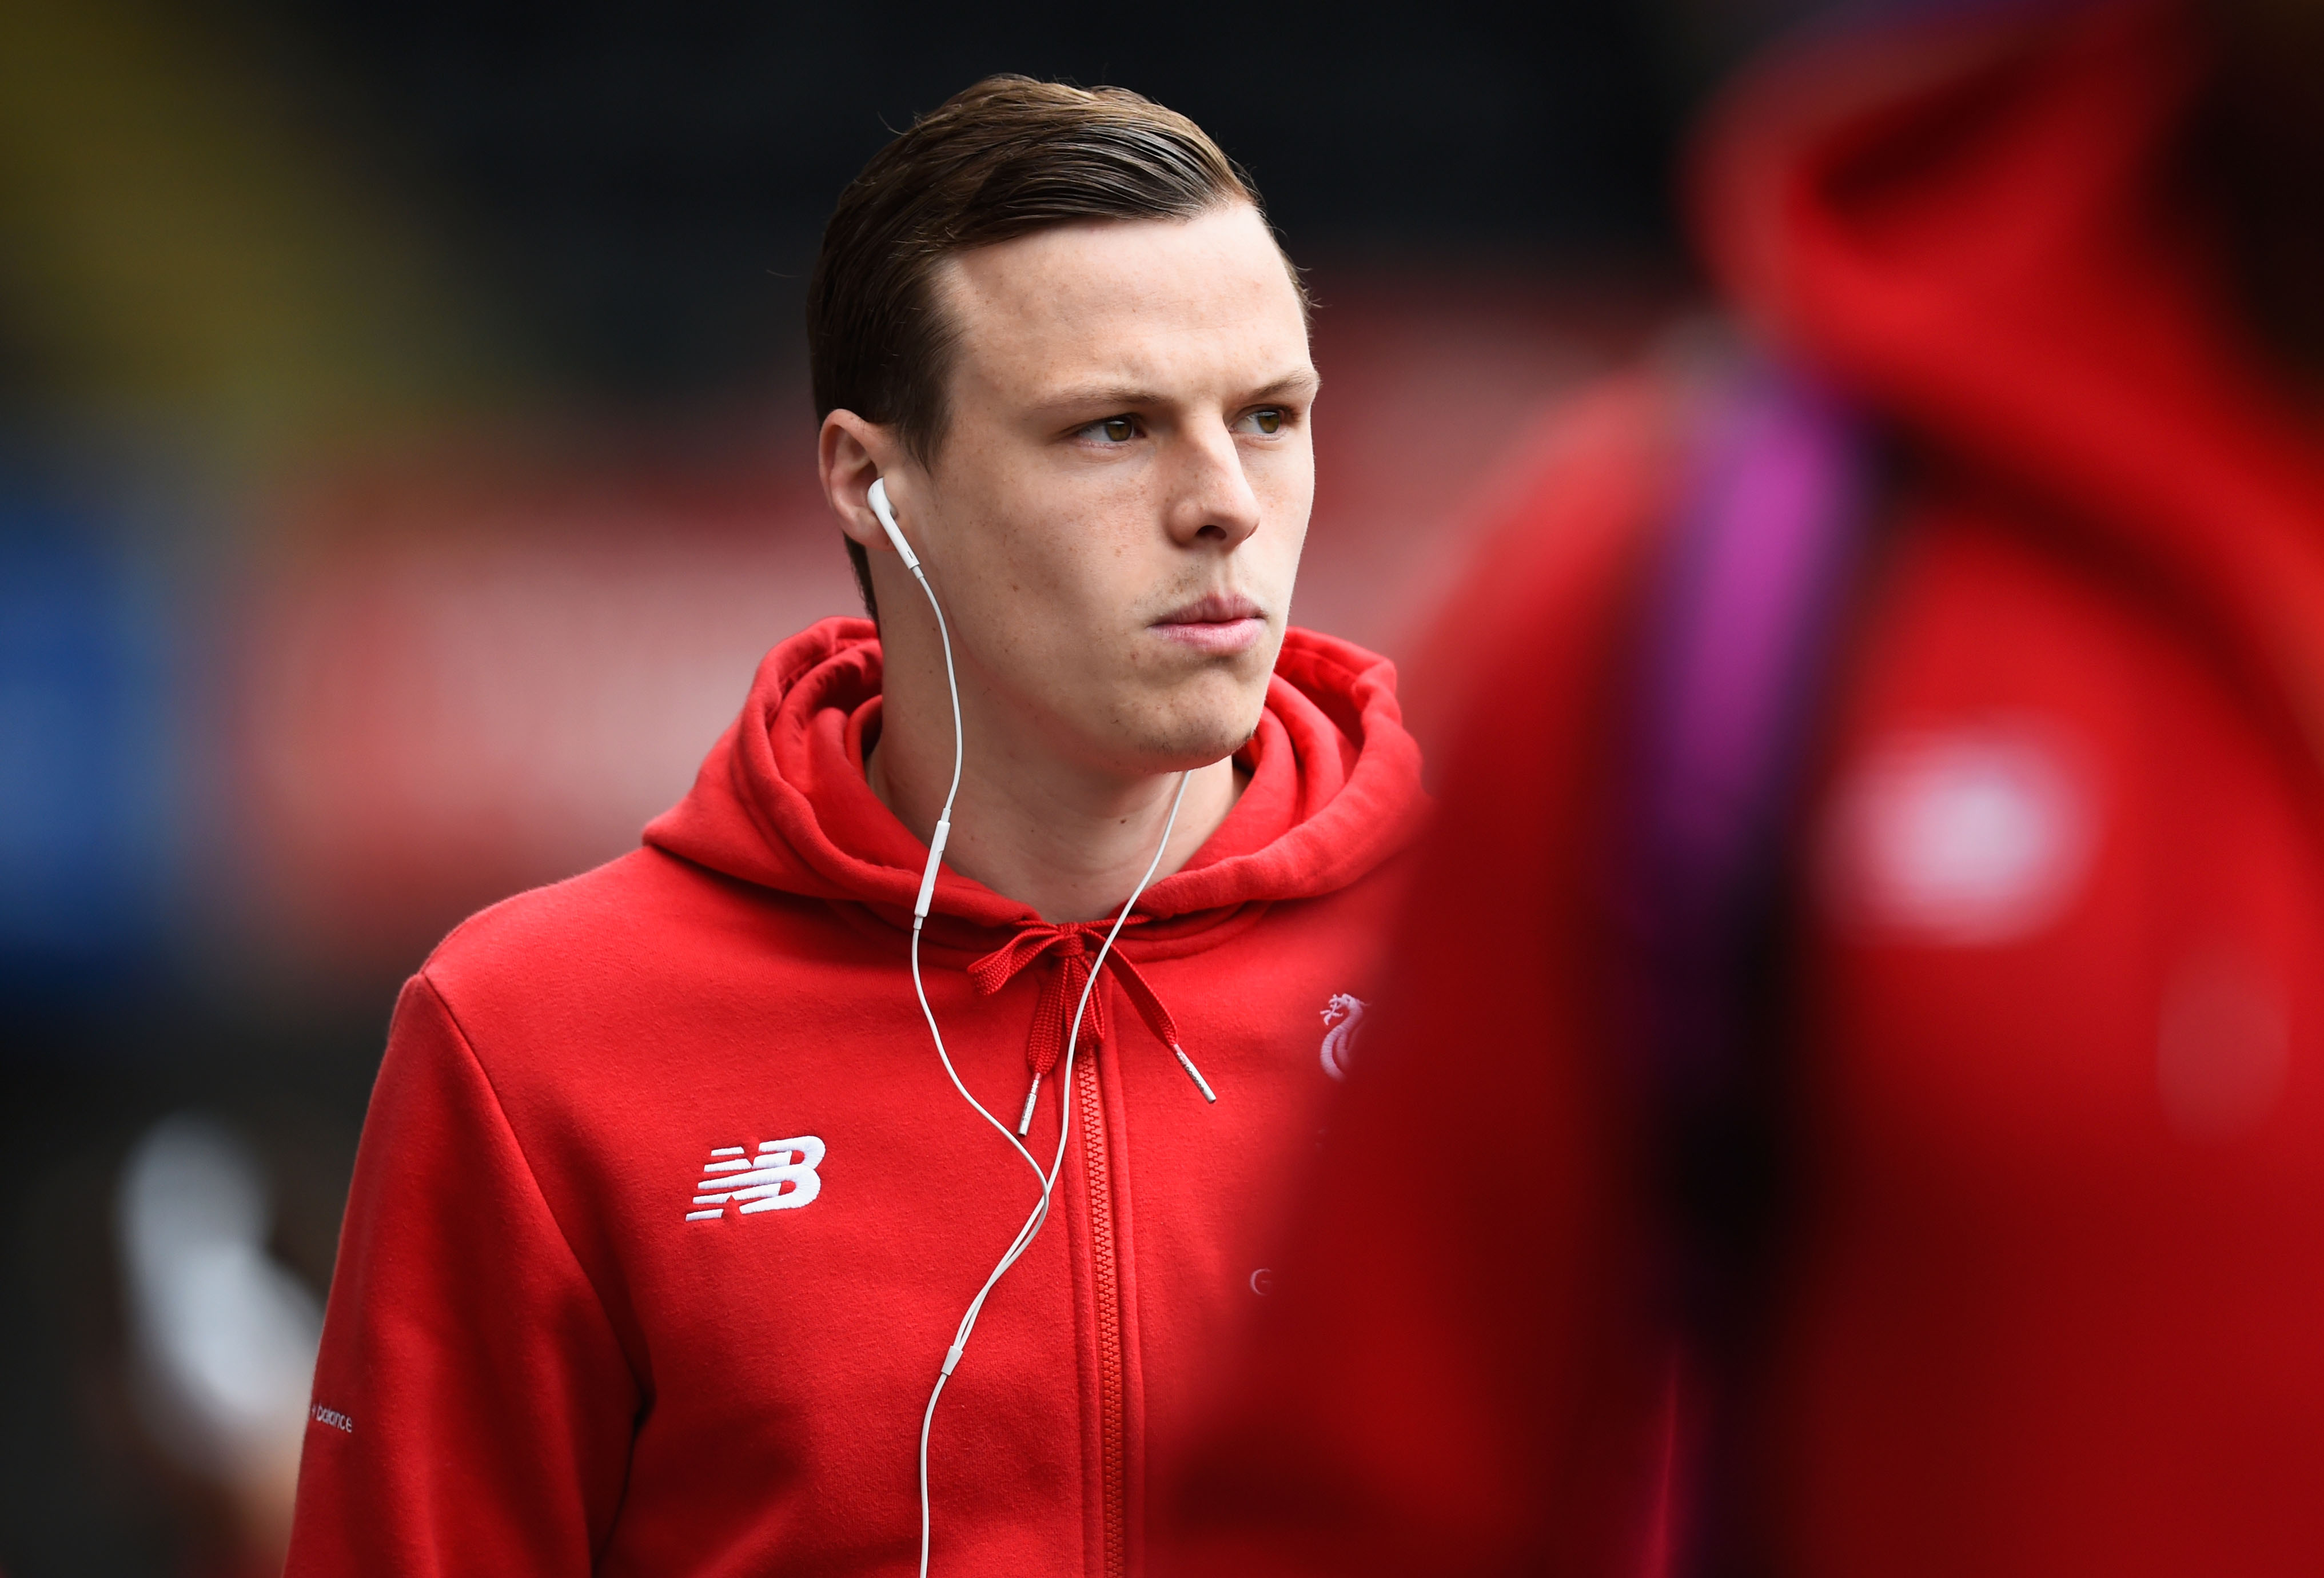 SWANSEA, WALES - MAY 01: Brad Smith of Liverpool arrives for the Barclays Premier League match between Swansea City and Liverpool at The Liberty Stadium on May 1, 2016 in Swansea, Wales.  (Photo by Stu Forster/Getty Images)